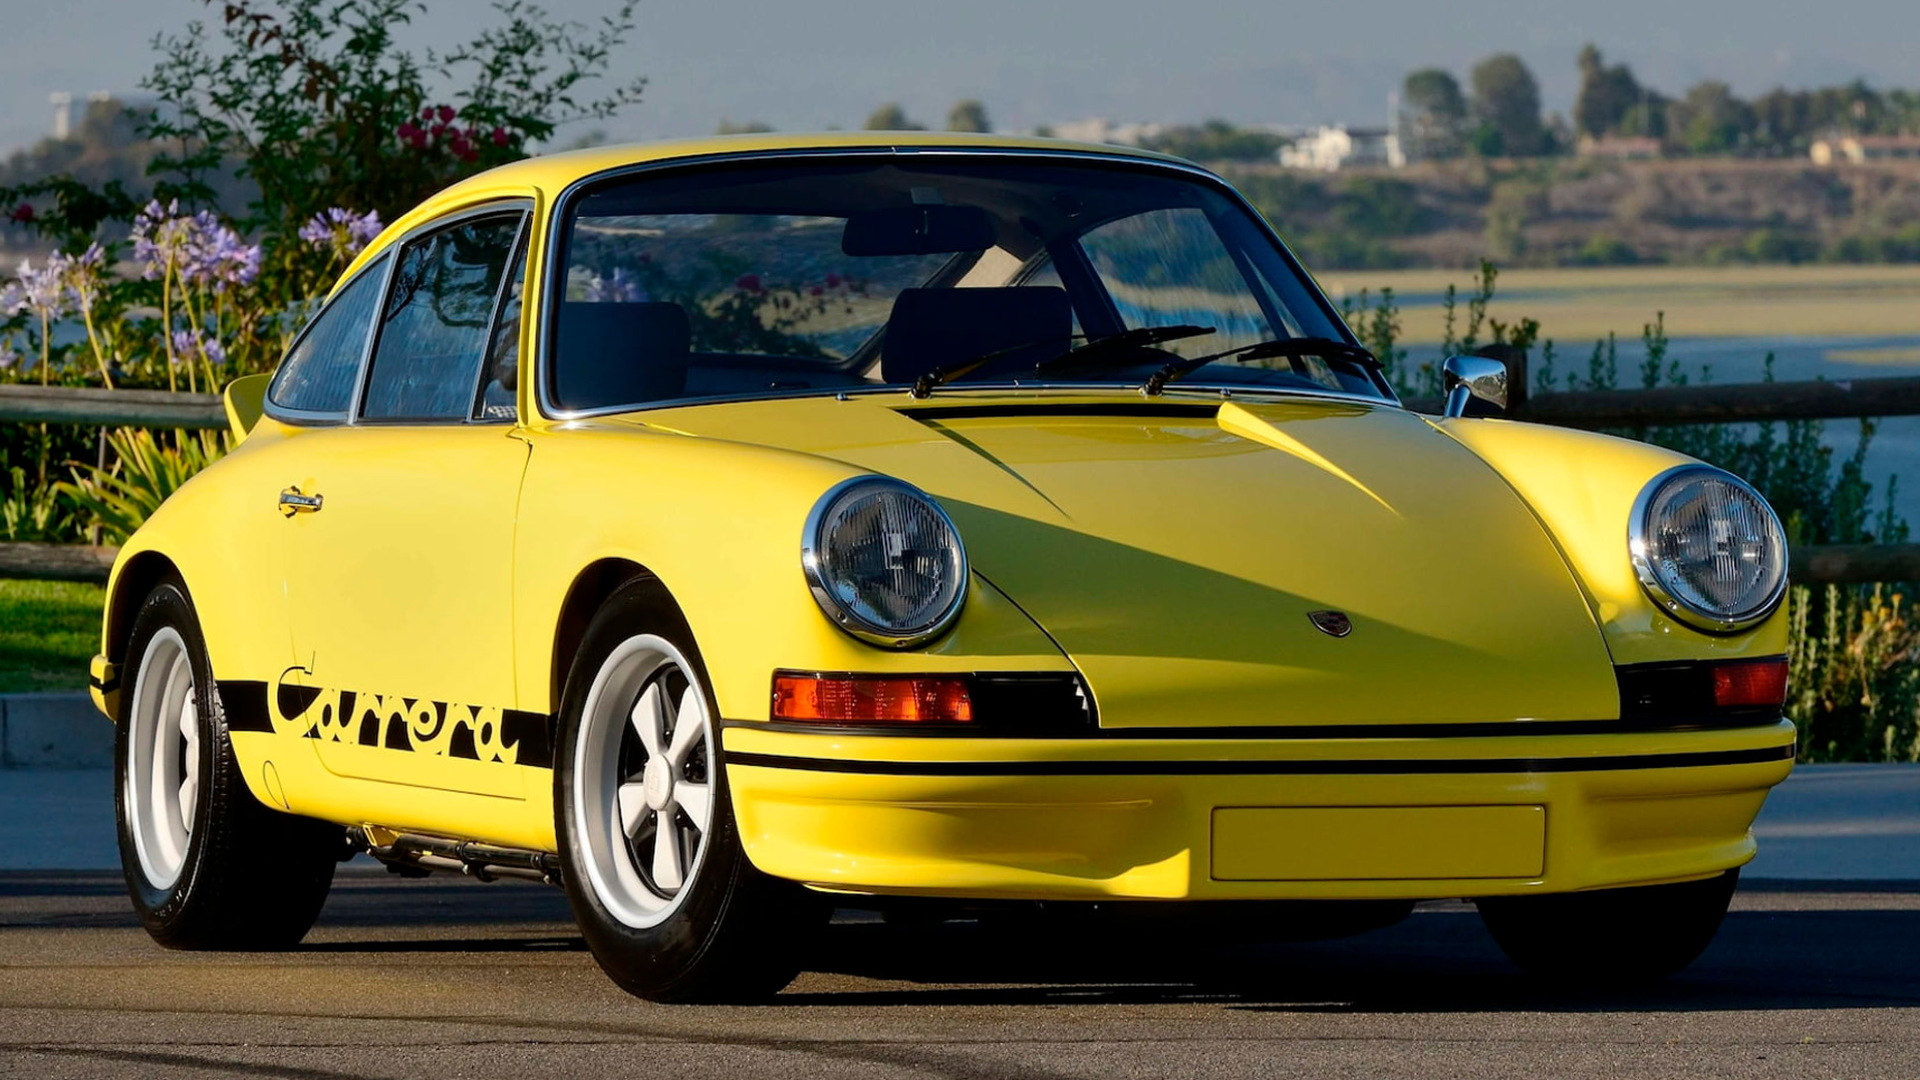 1973 Porsche 911 Carrera RS 2.7 once owned by Paul Walker - Photo credit: Mecum